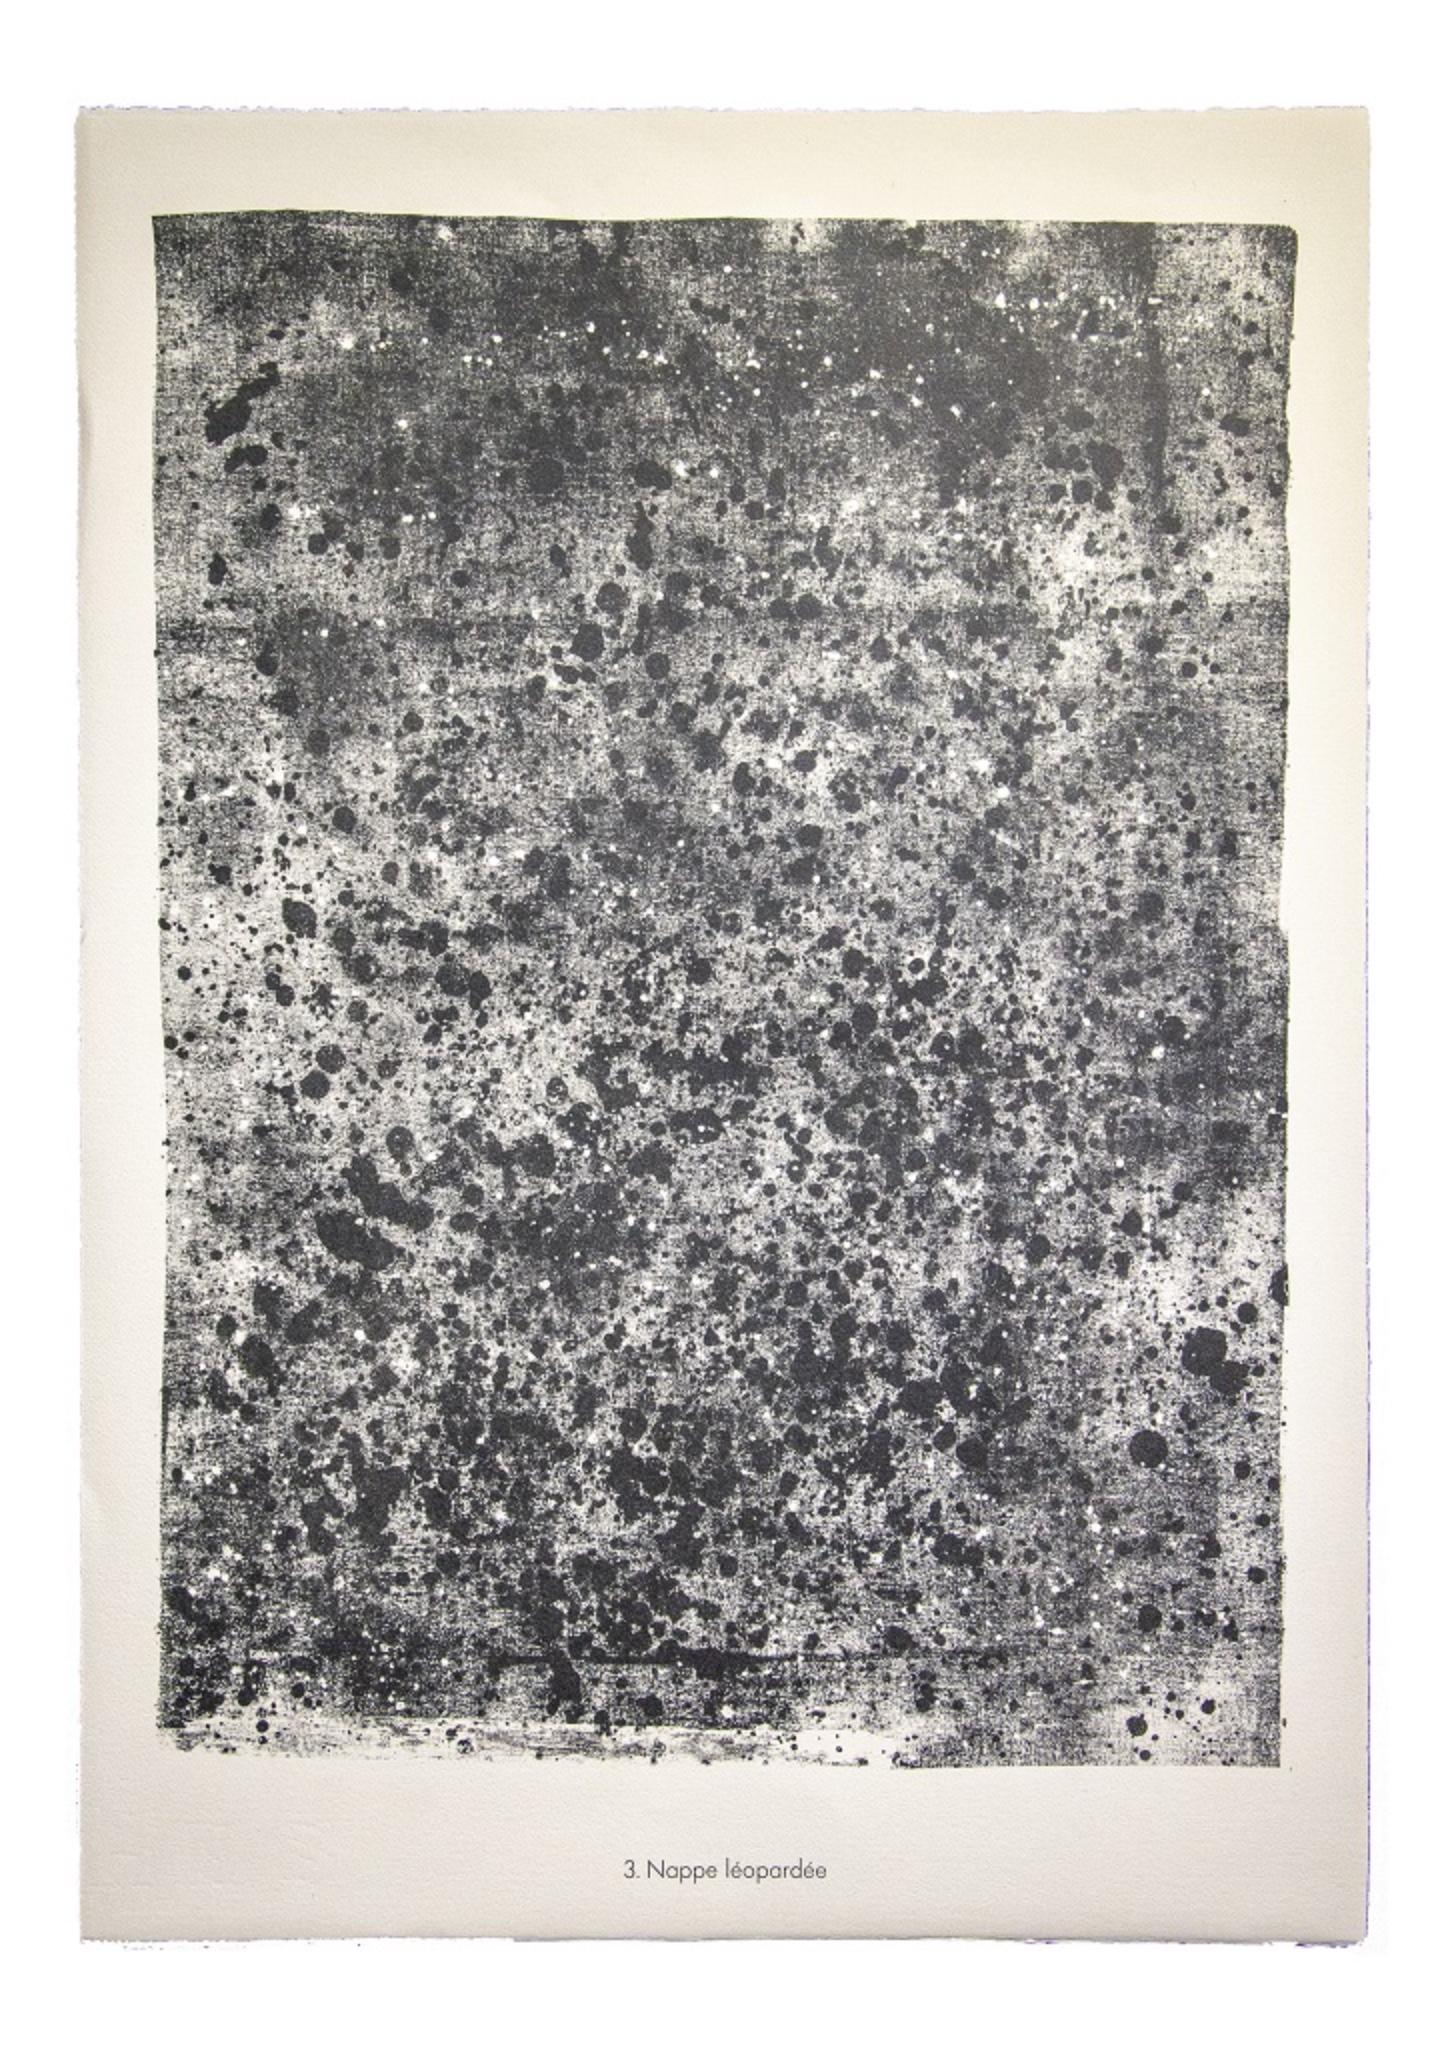 Nappe Léopardée - From Sols, Terre - Original Lithograph by Jean Dubuffet - 1959